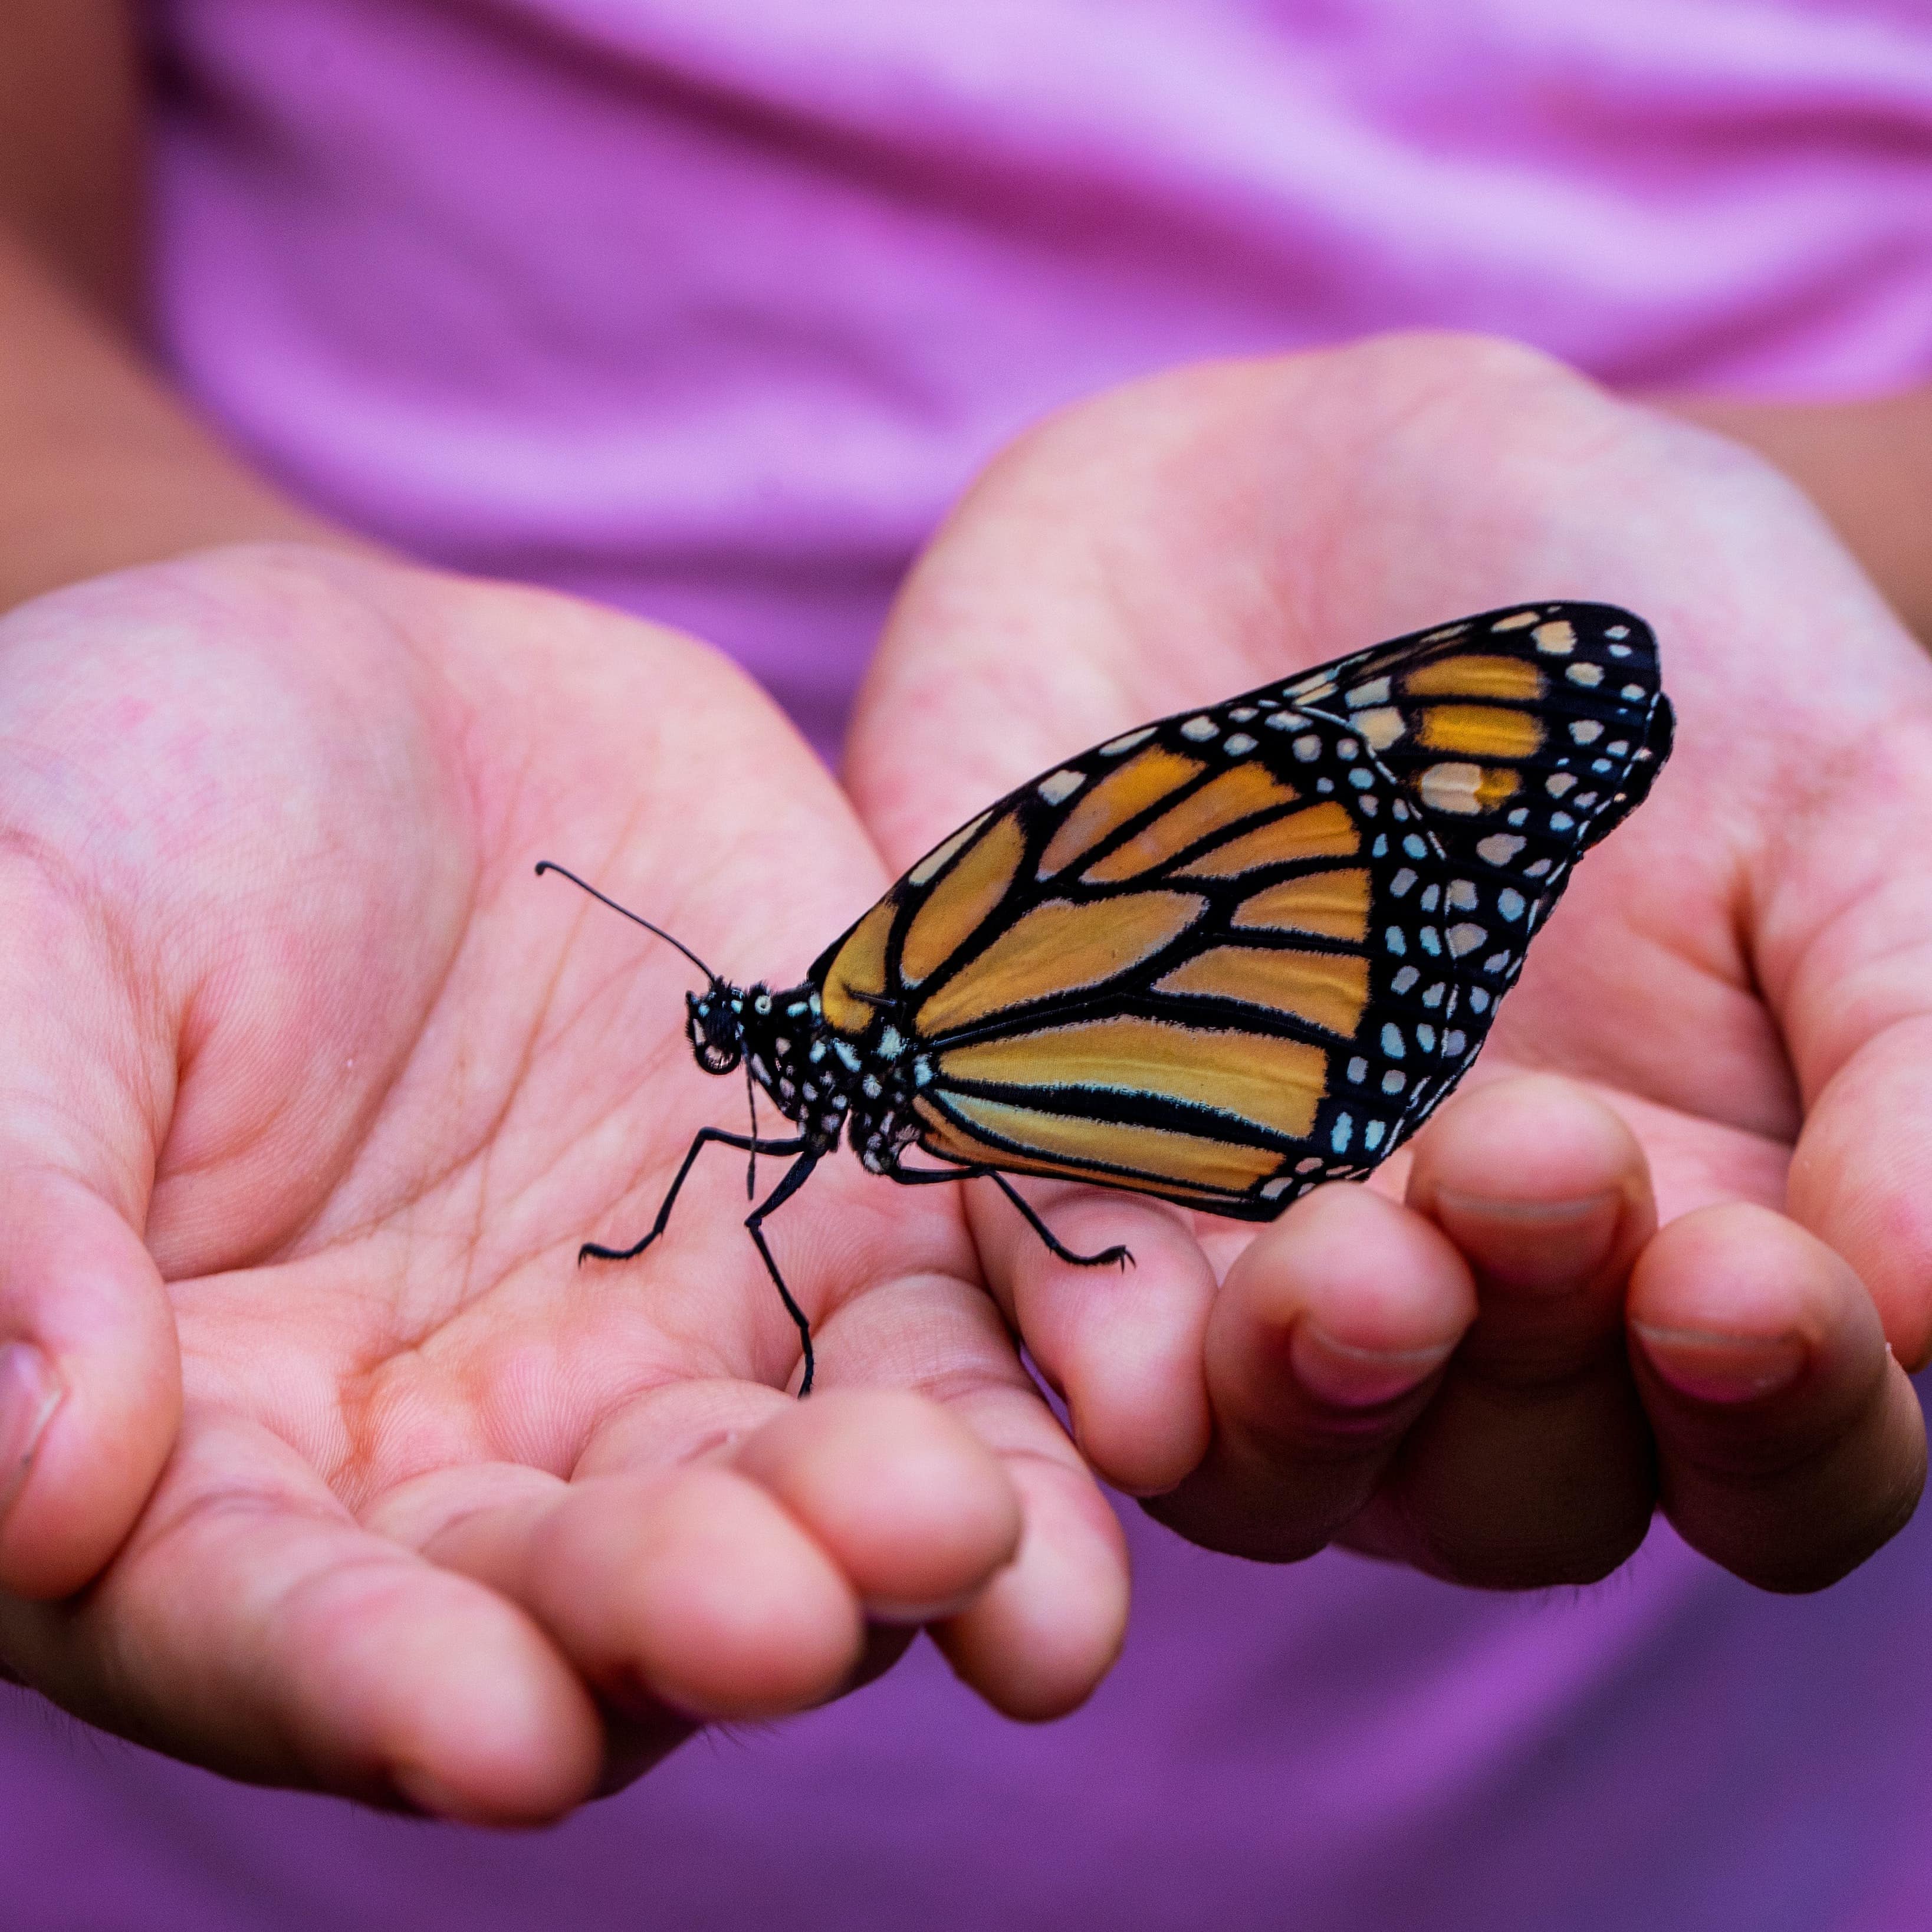 Child's hands holding an orange and black butterfly